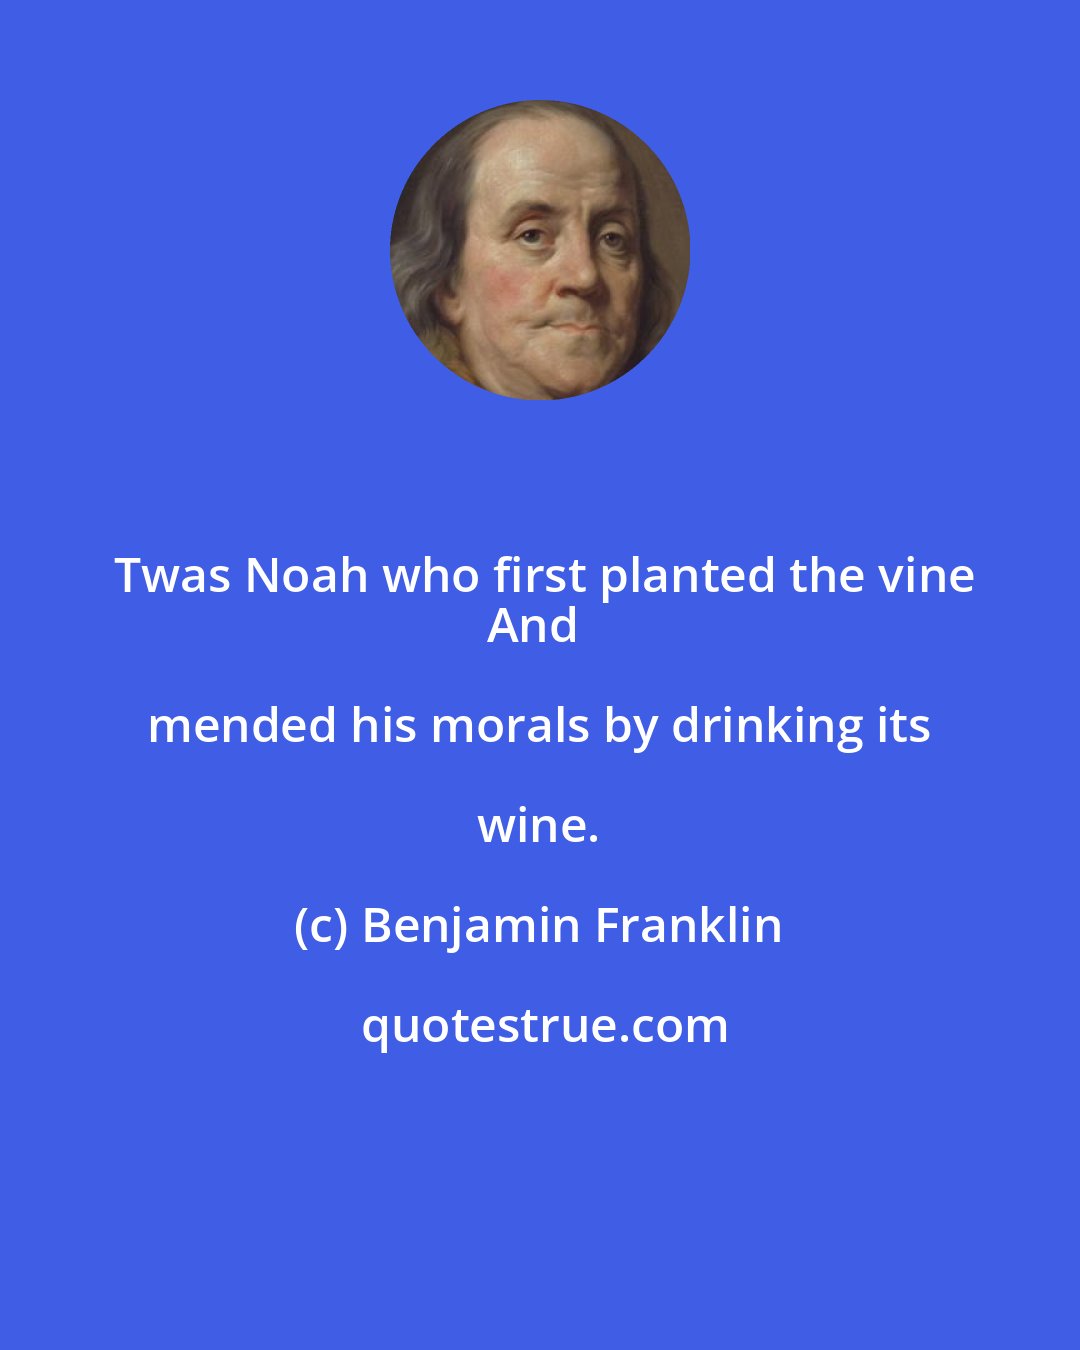 Benjamin Franklin: Twas Noah who first planted the vine
And mended his morals by drinking its wine.